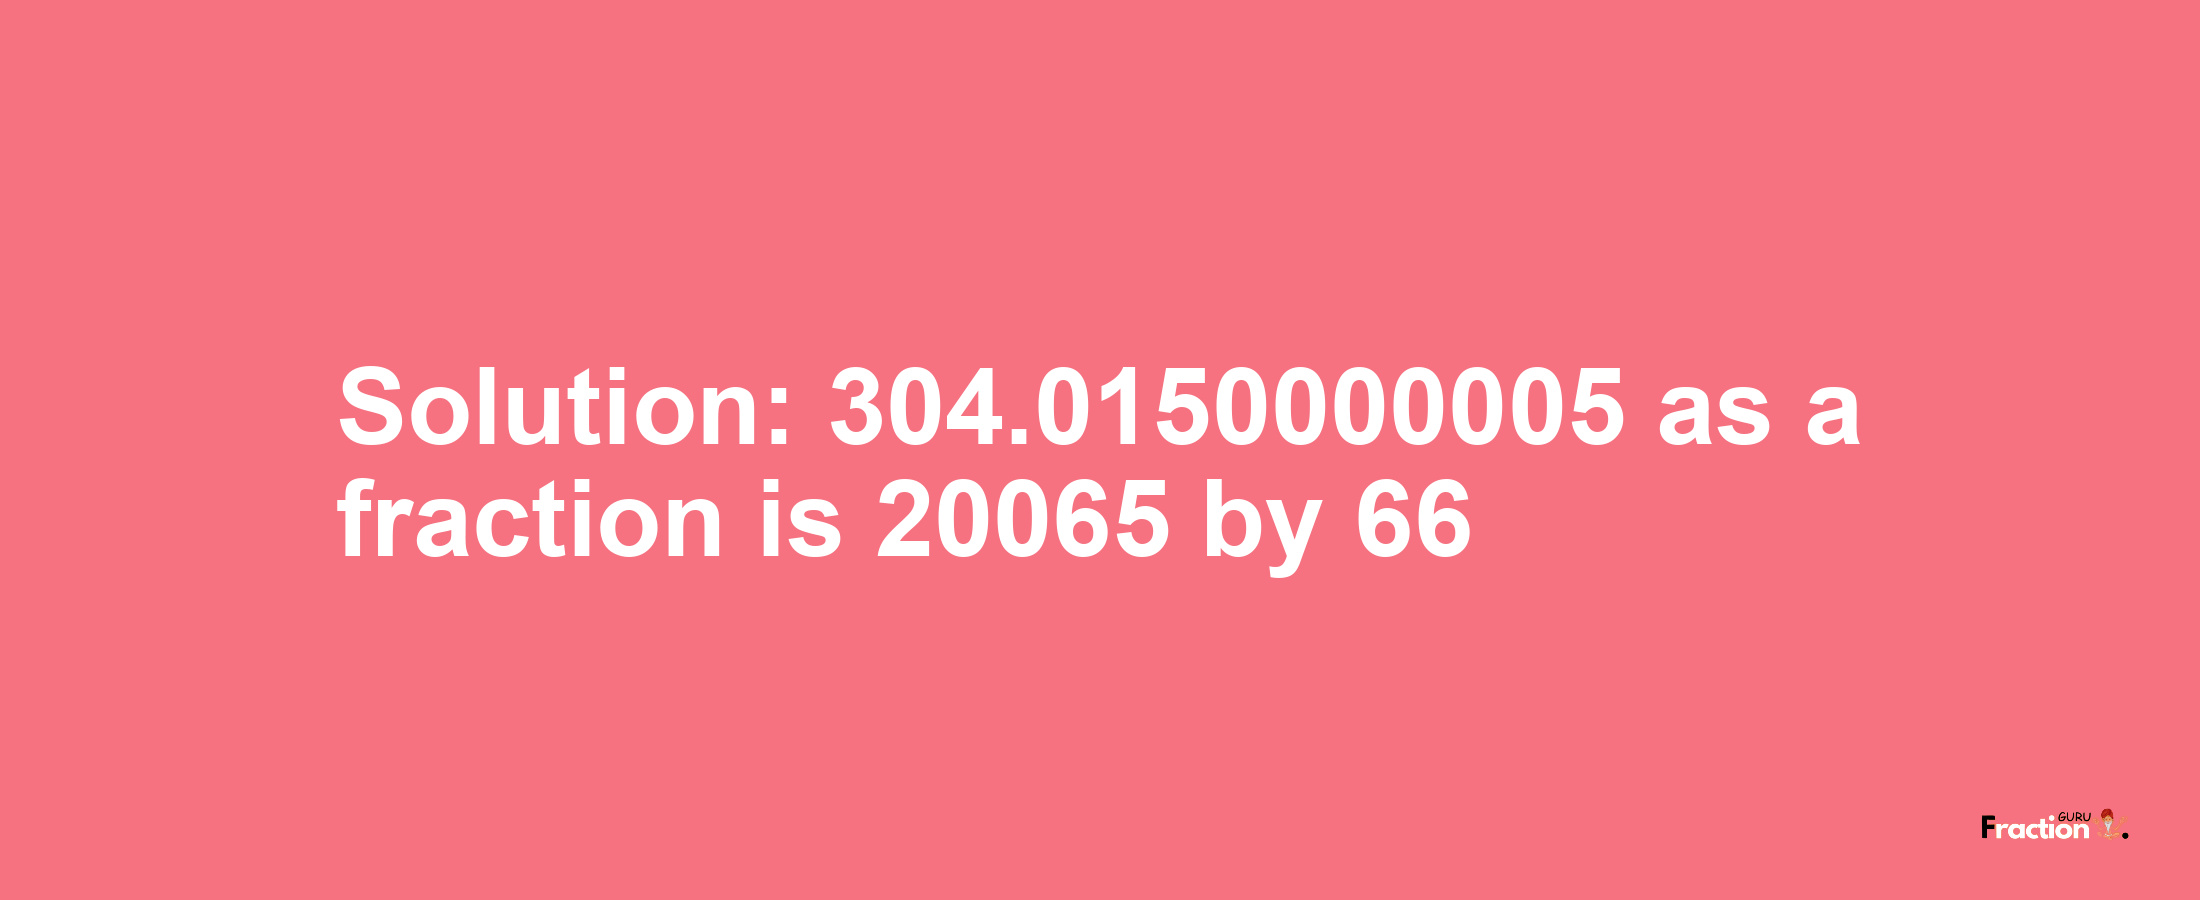 Solution:304.0150000005 as a fraction is 20065/66